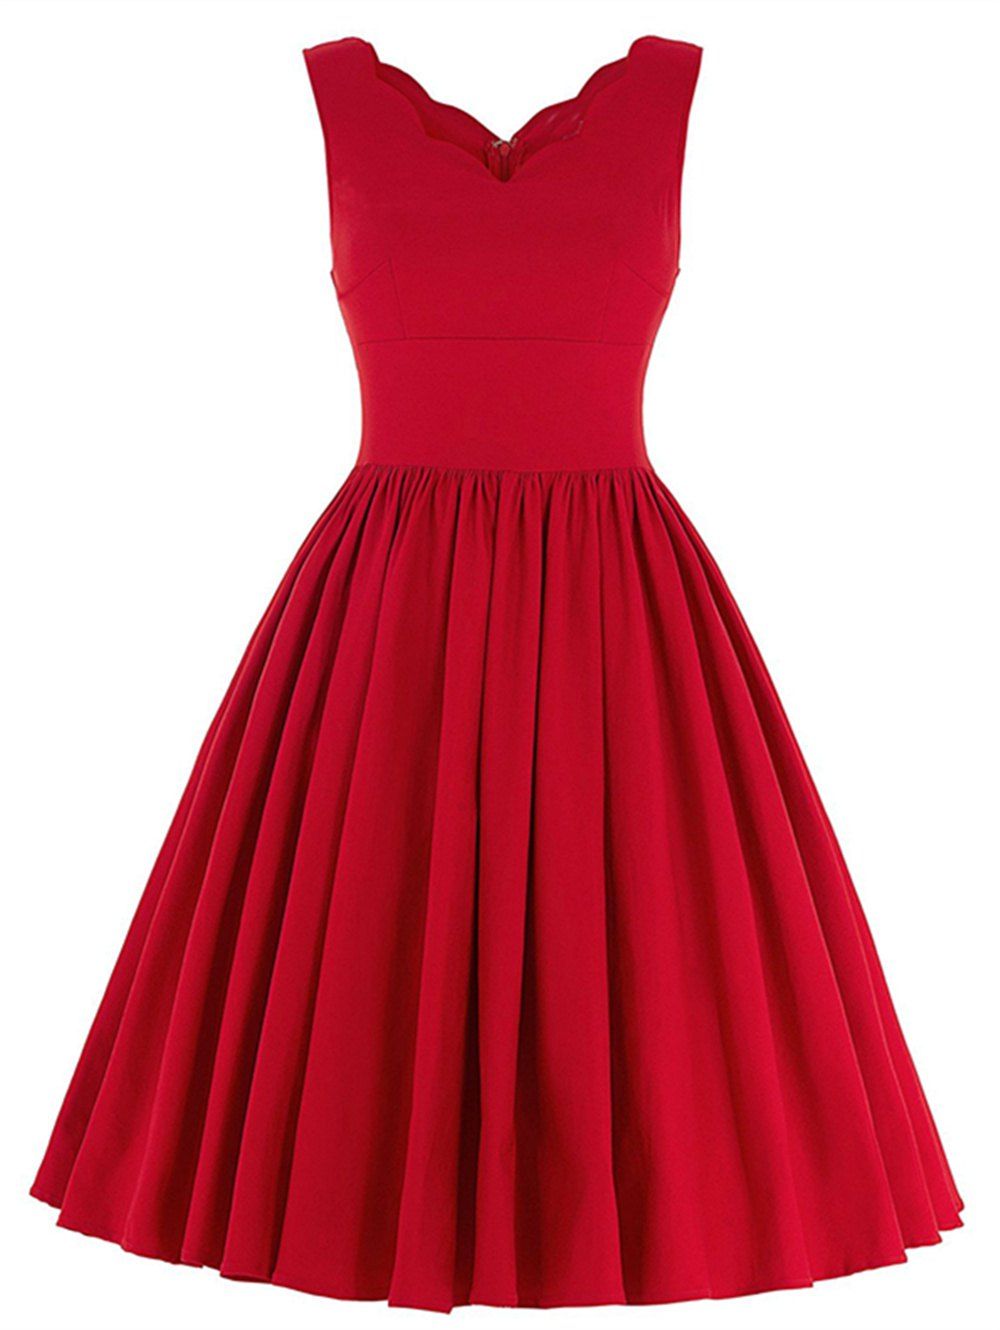 [17% OFF] 2021 Scalloped A Line Swing Cocktail Dress In RED | DressLily